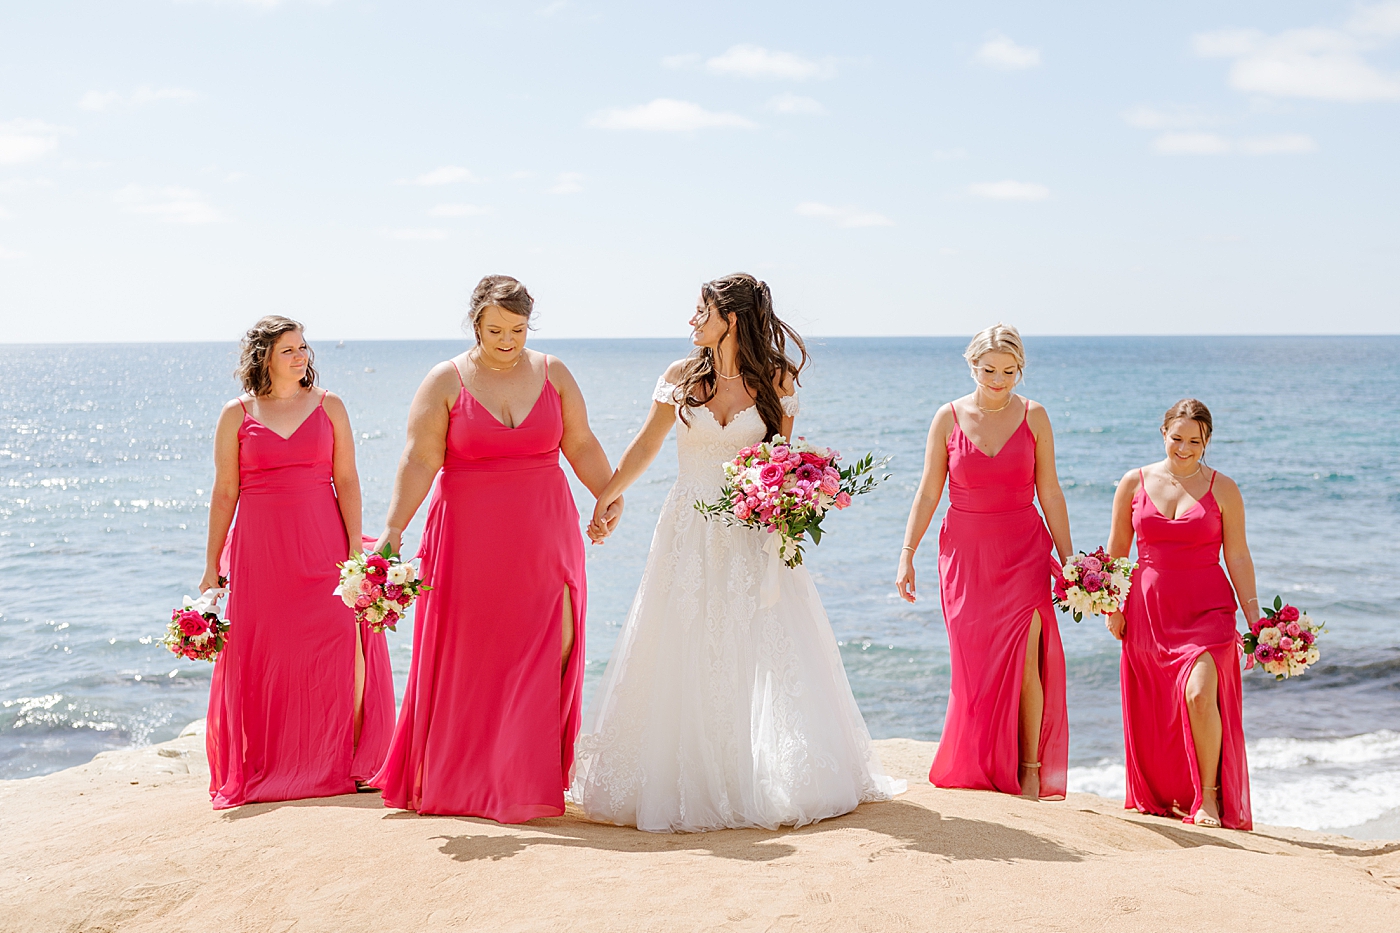 Bride and bridesmaids in hot pink looking at each other and walking towards the camera | Image by Hope Helmuth Photography